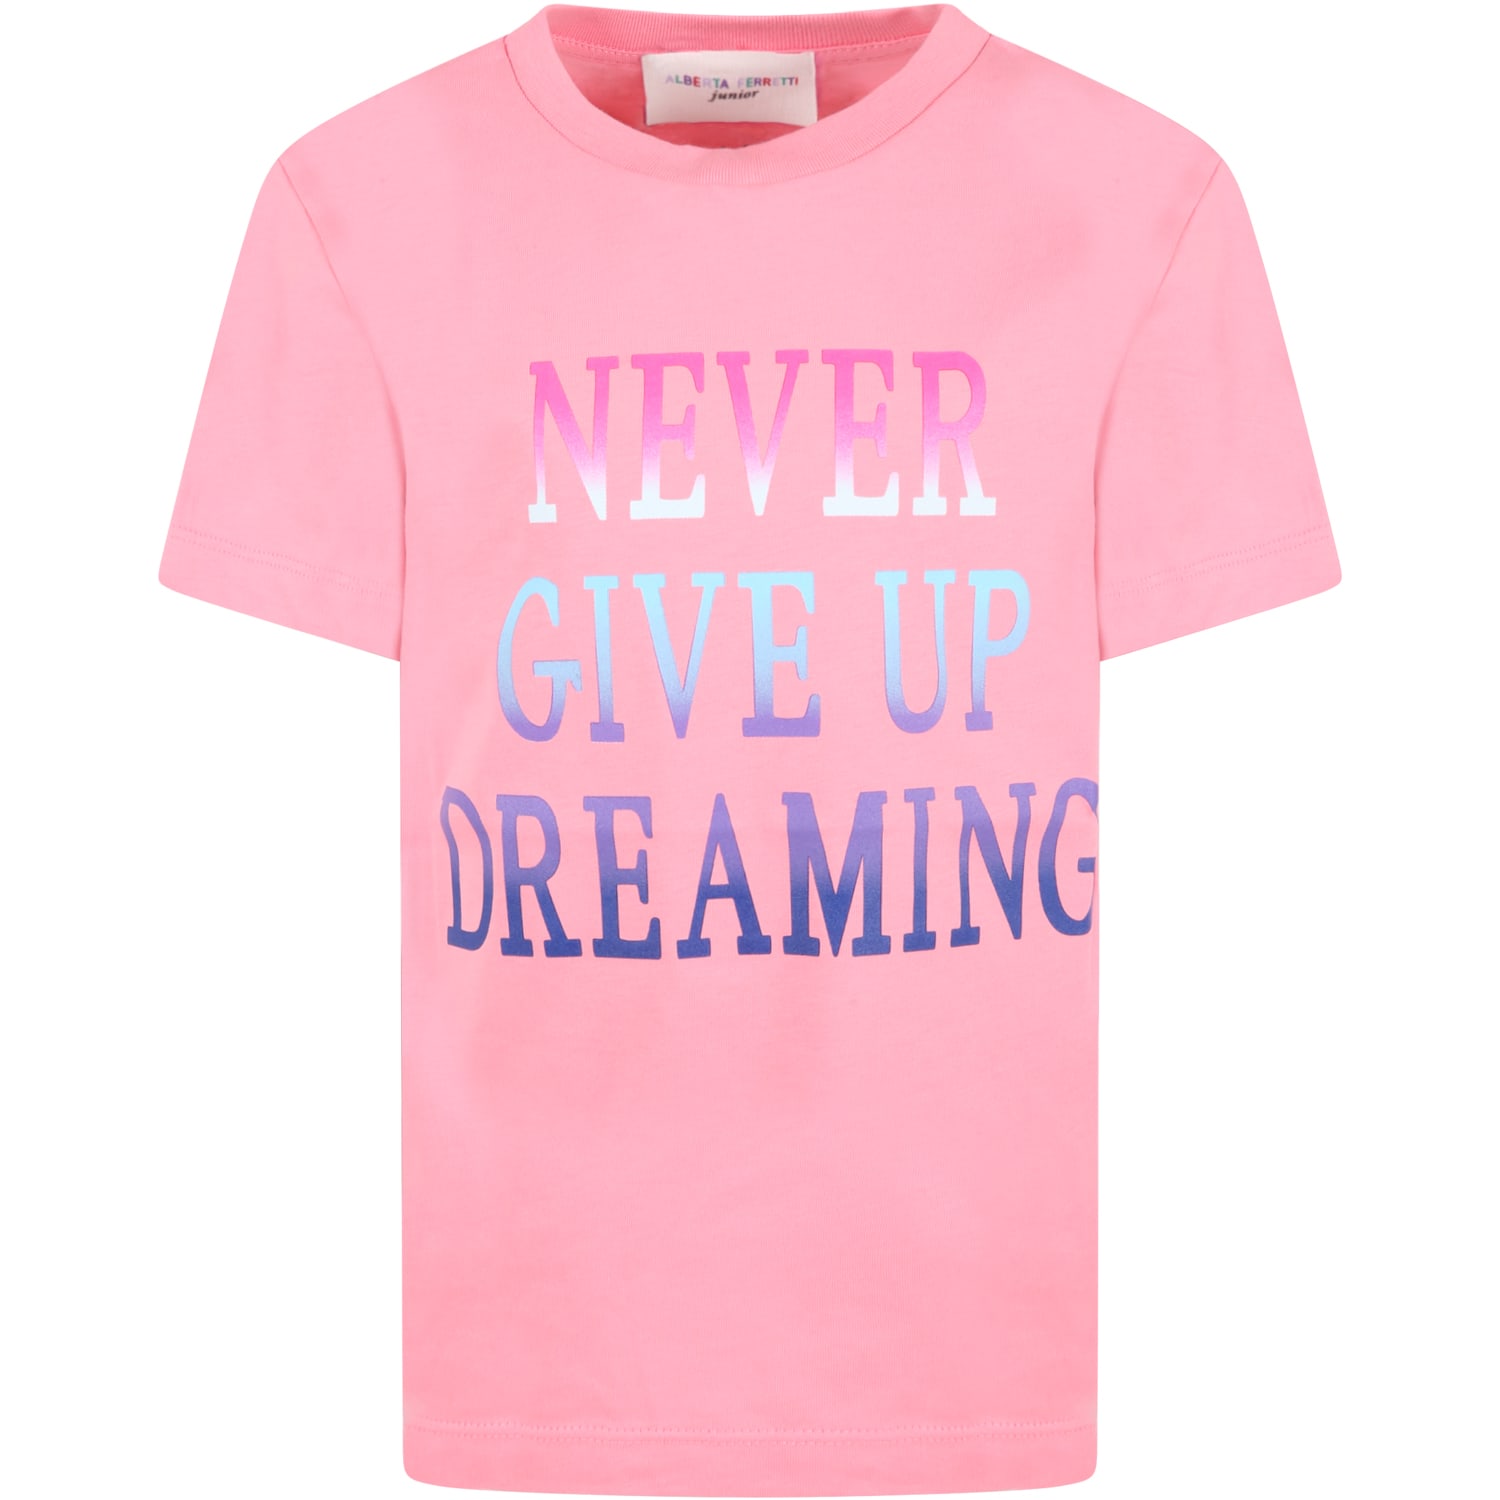 Alberta Ferretti Pink T-shirt For Girl With Multicolor Writing